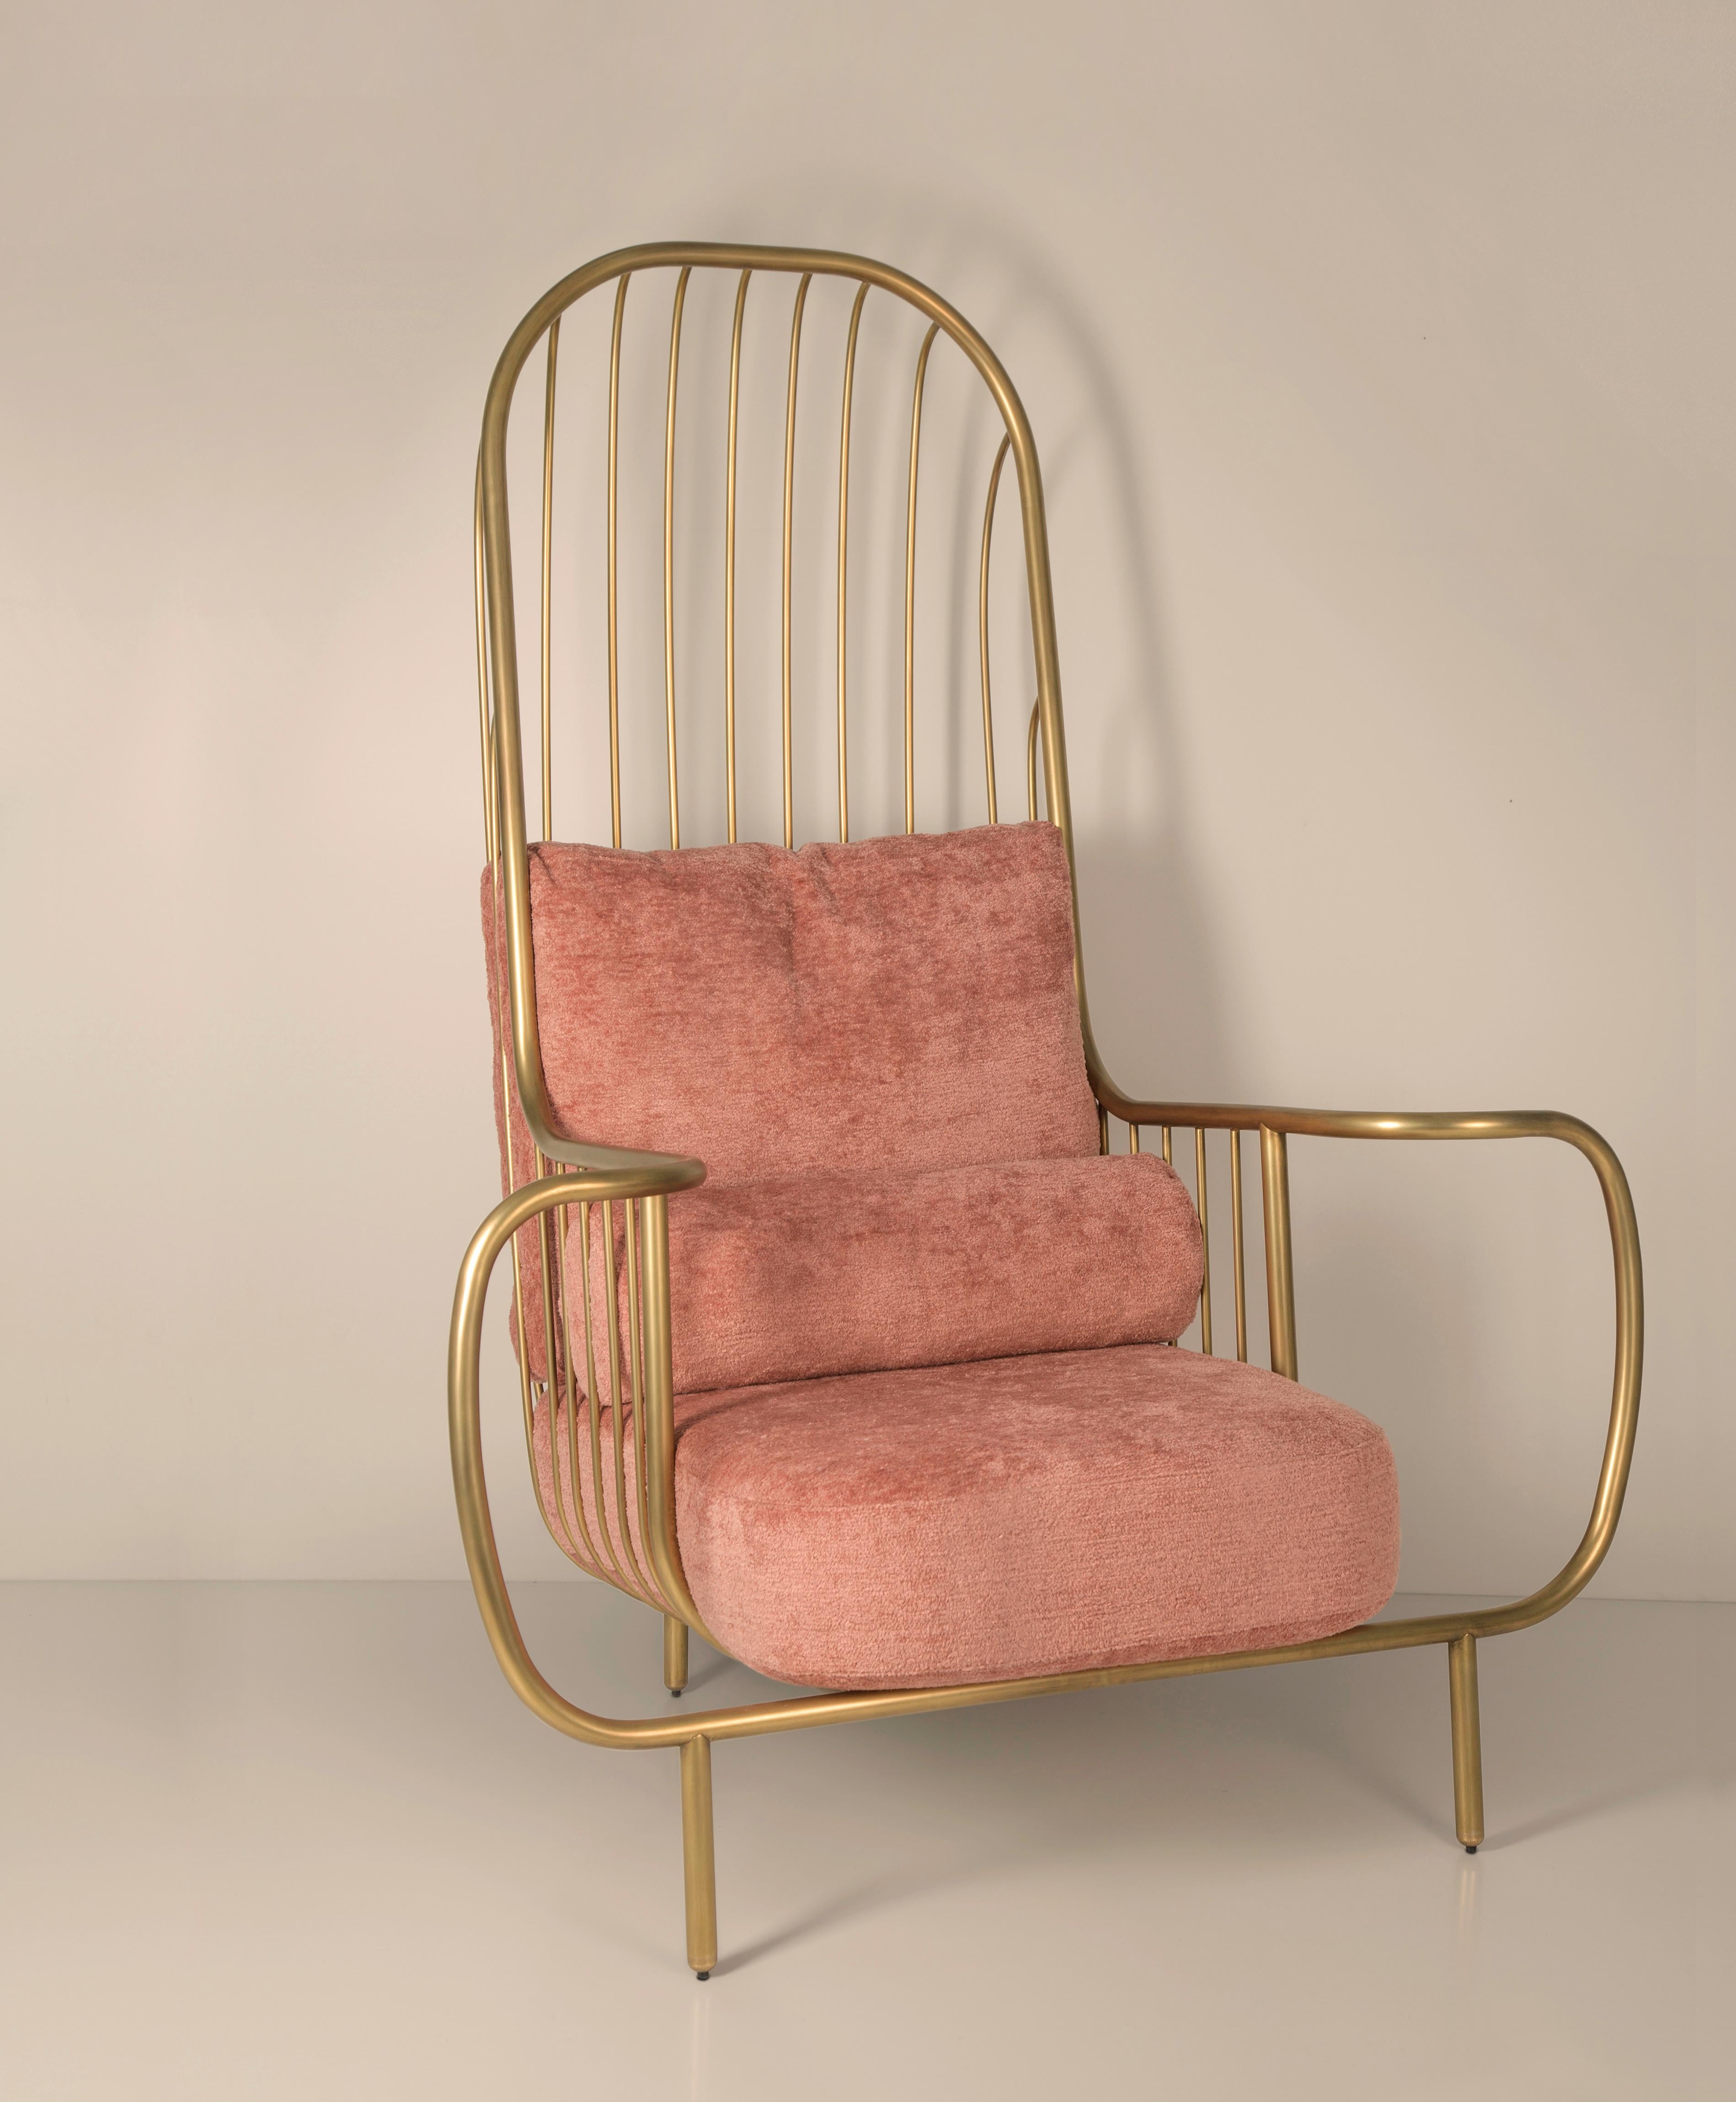 Inspiration:
The sculptural forms of the 30s inspired the Liberty Collection. The tubular and steel structures that have marked those years are combined with a new inspiration that emphasizes the antagonistic feeling of deprivation of liberty. This